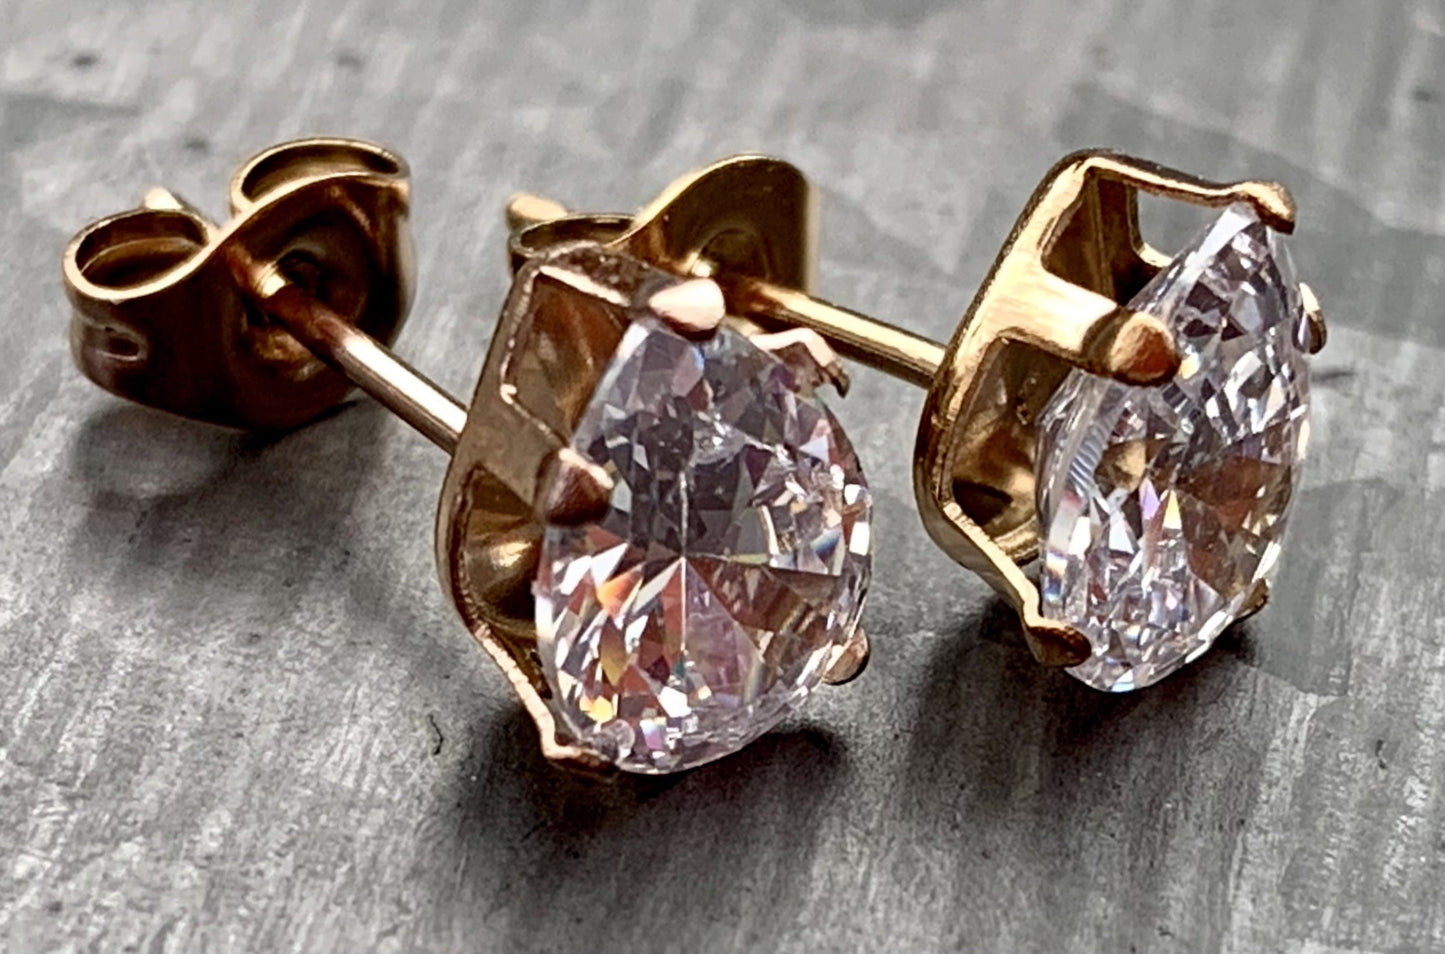 PAIR of Beautiful Hypoallergenic Clear CZ Gem Teardrop Rose Gold Stud Earrings - 3mm, 4mm, 5mm, 6mm & 7mm Gem Size Available!